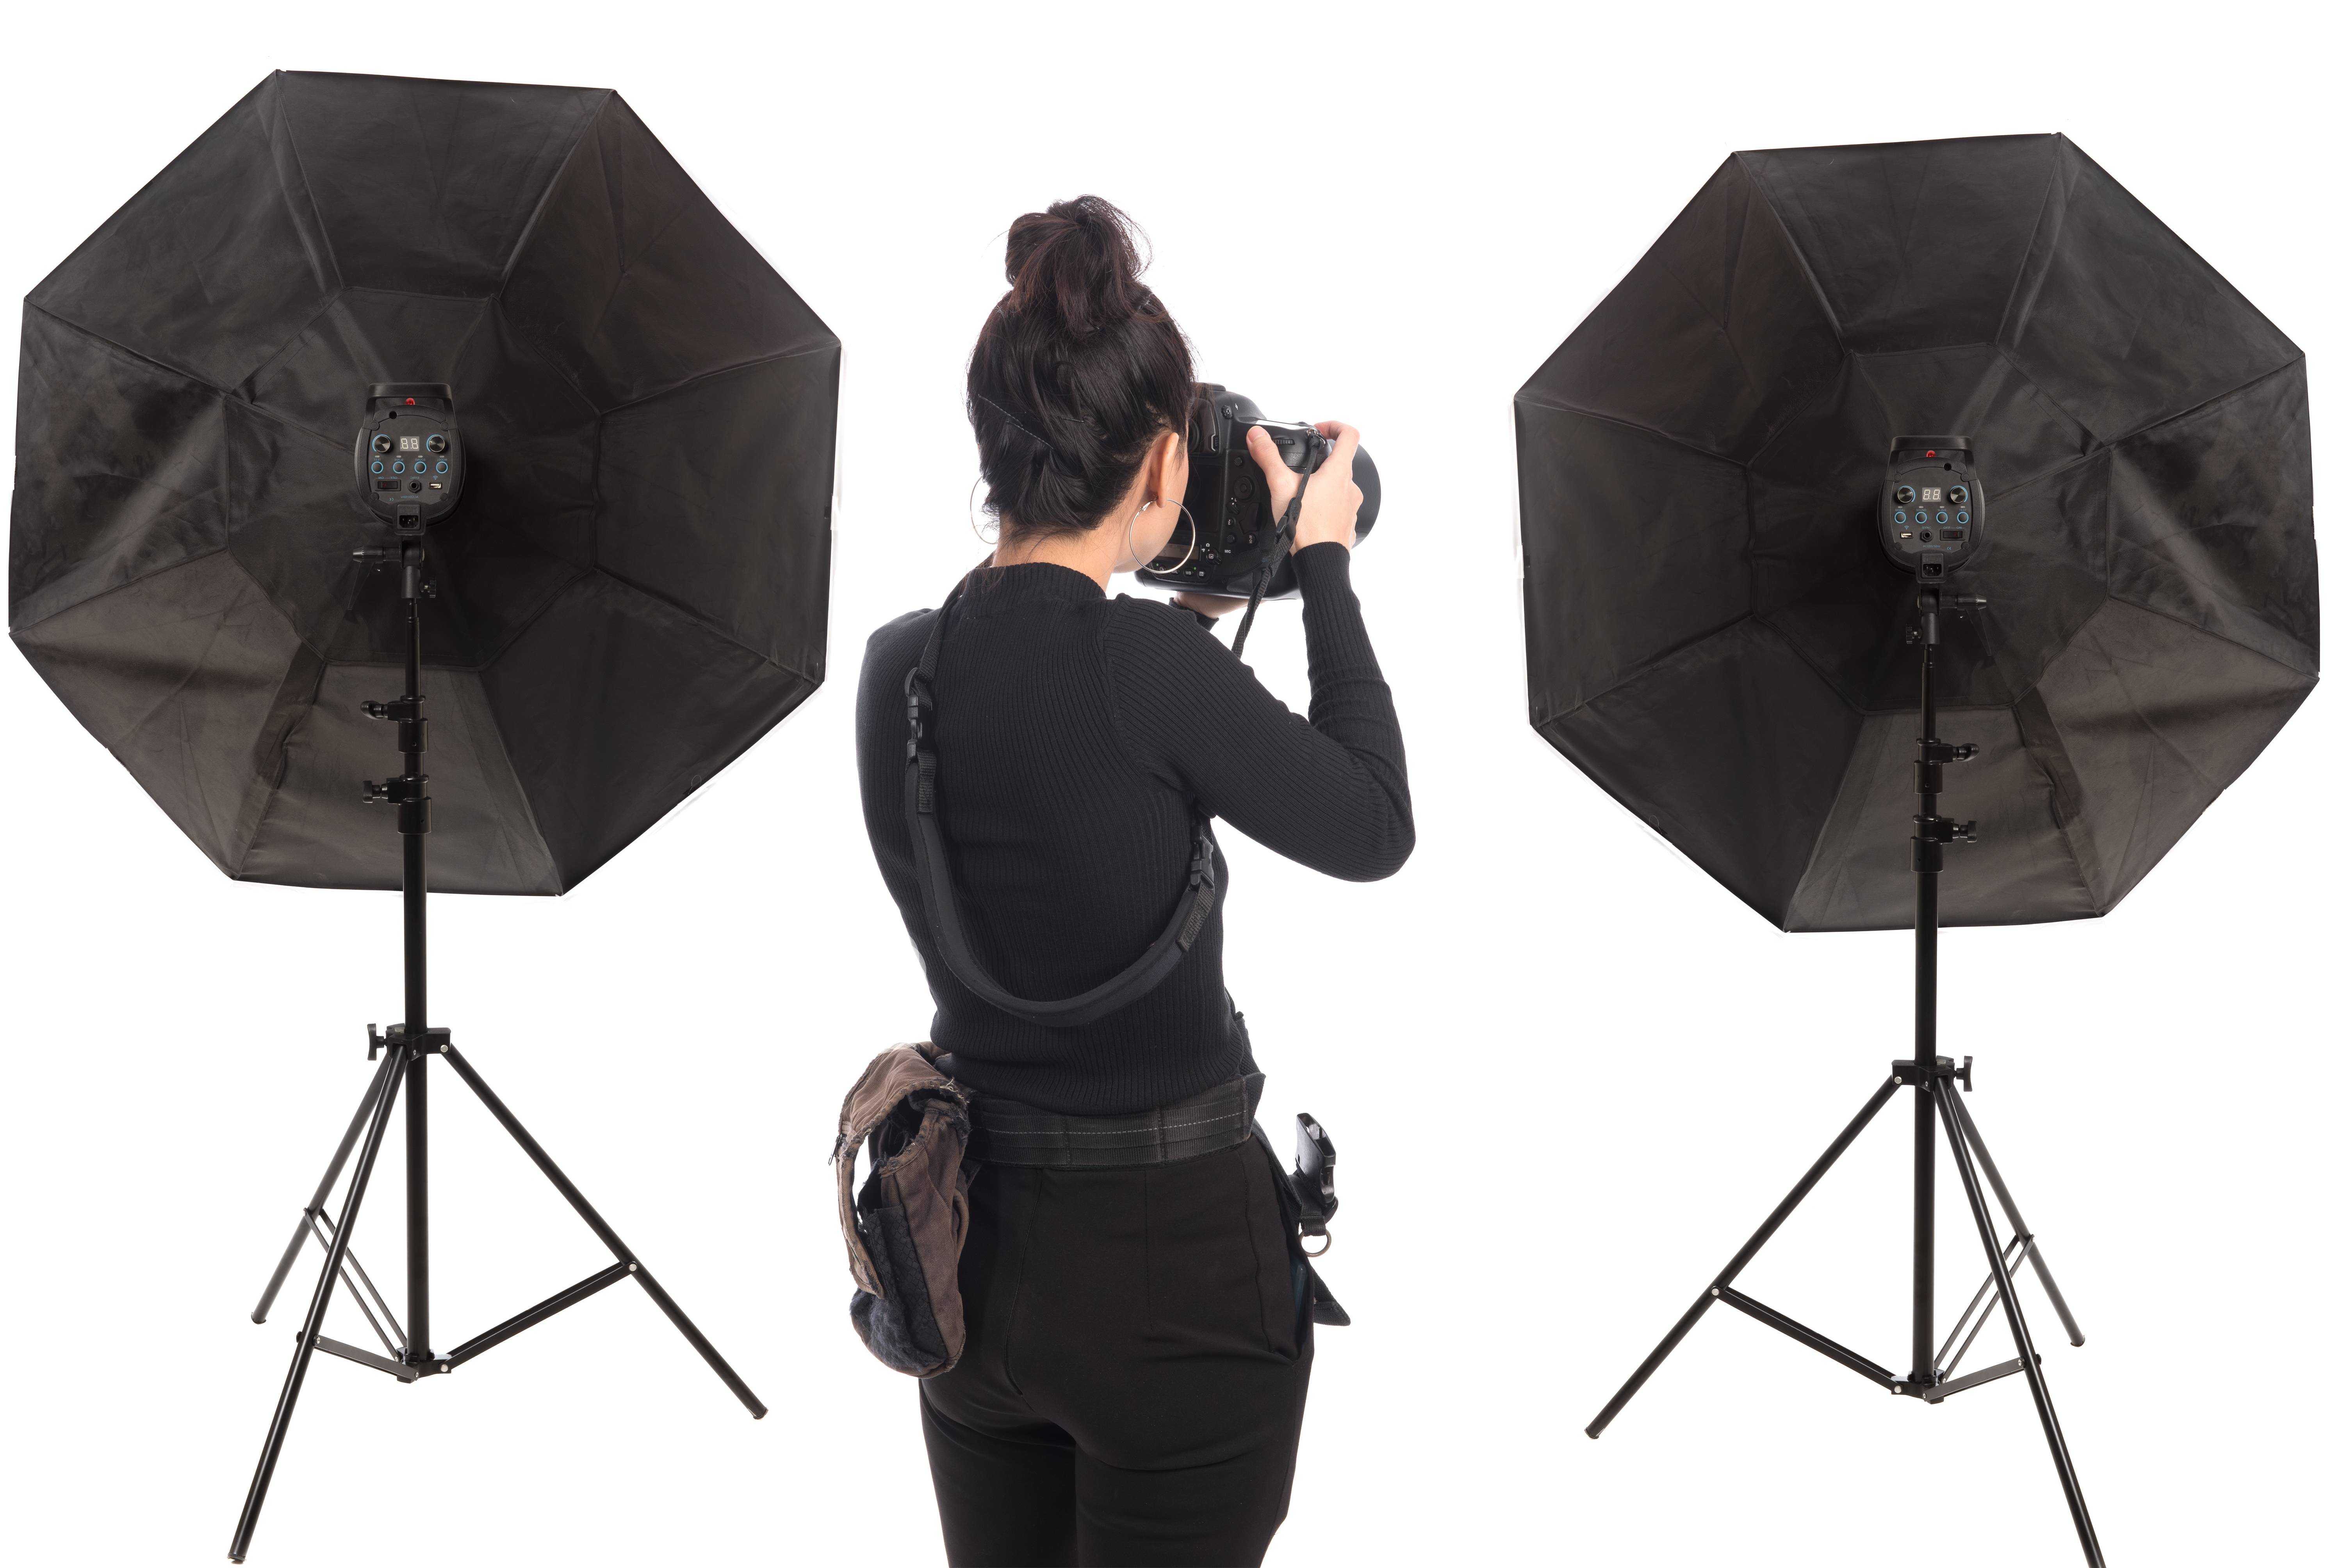 Photographer working l in studio with equipments isolated on white background.